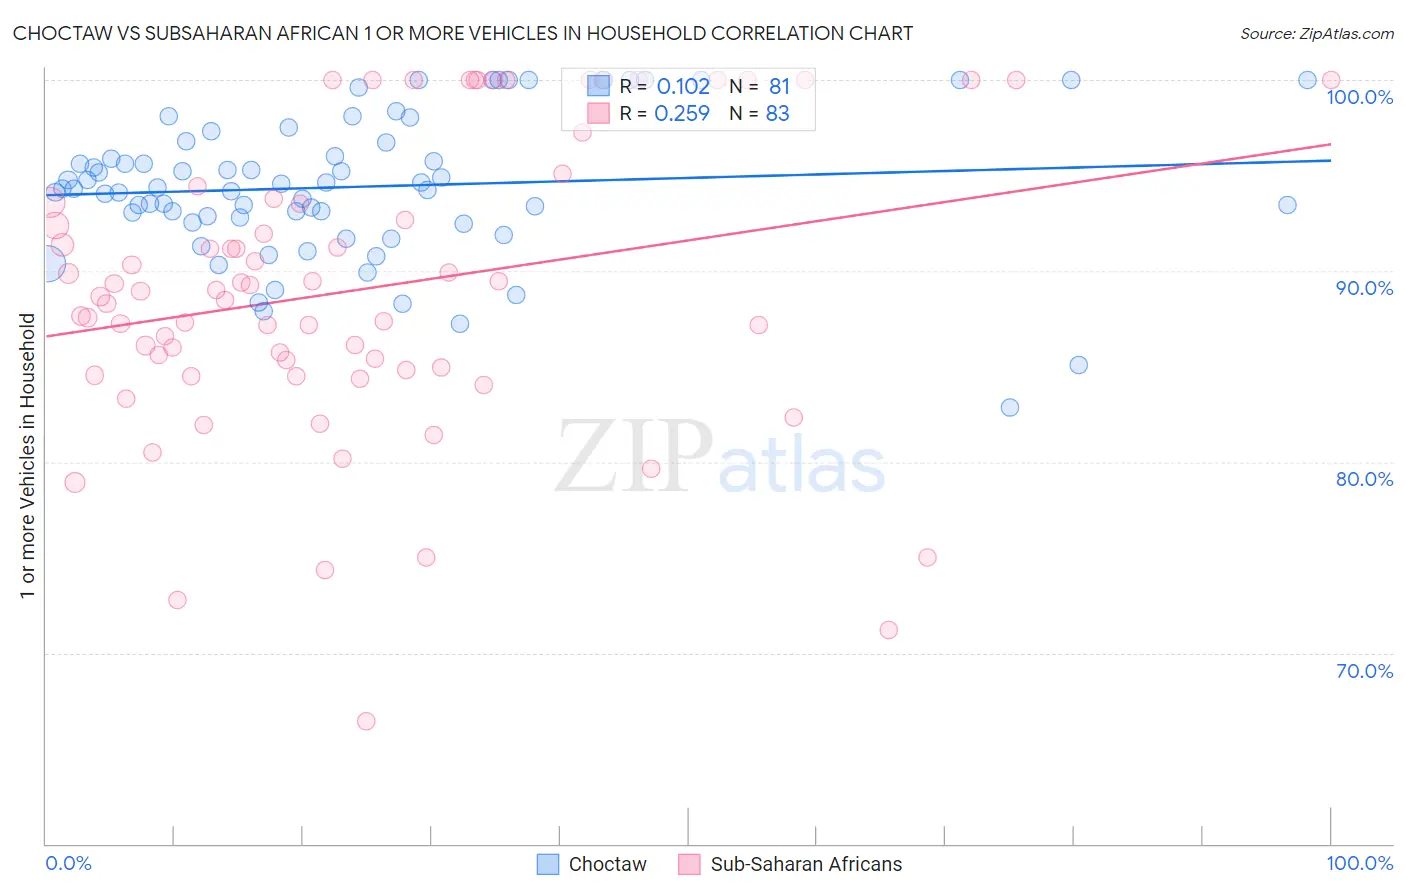 Choctaw vs Subsaharan African 1 or more Vehicles in Household